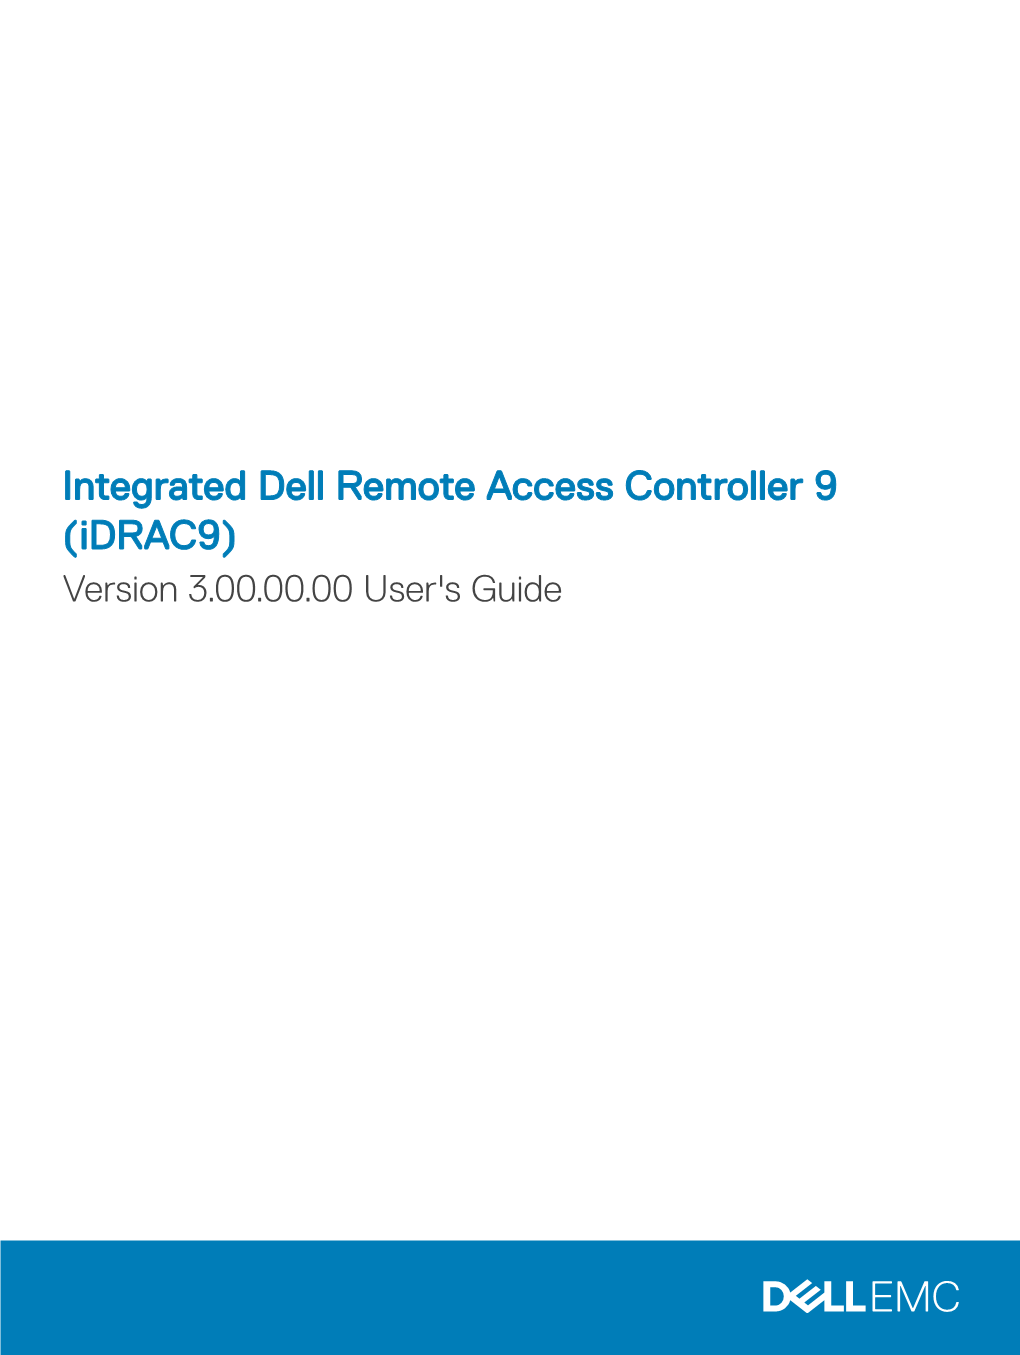 Integrated Dell Remote Access Controller 9 (Idrac9) Version 3.00.00.00 User's Guide Notes, Cautions, and Warnings